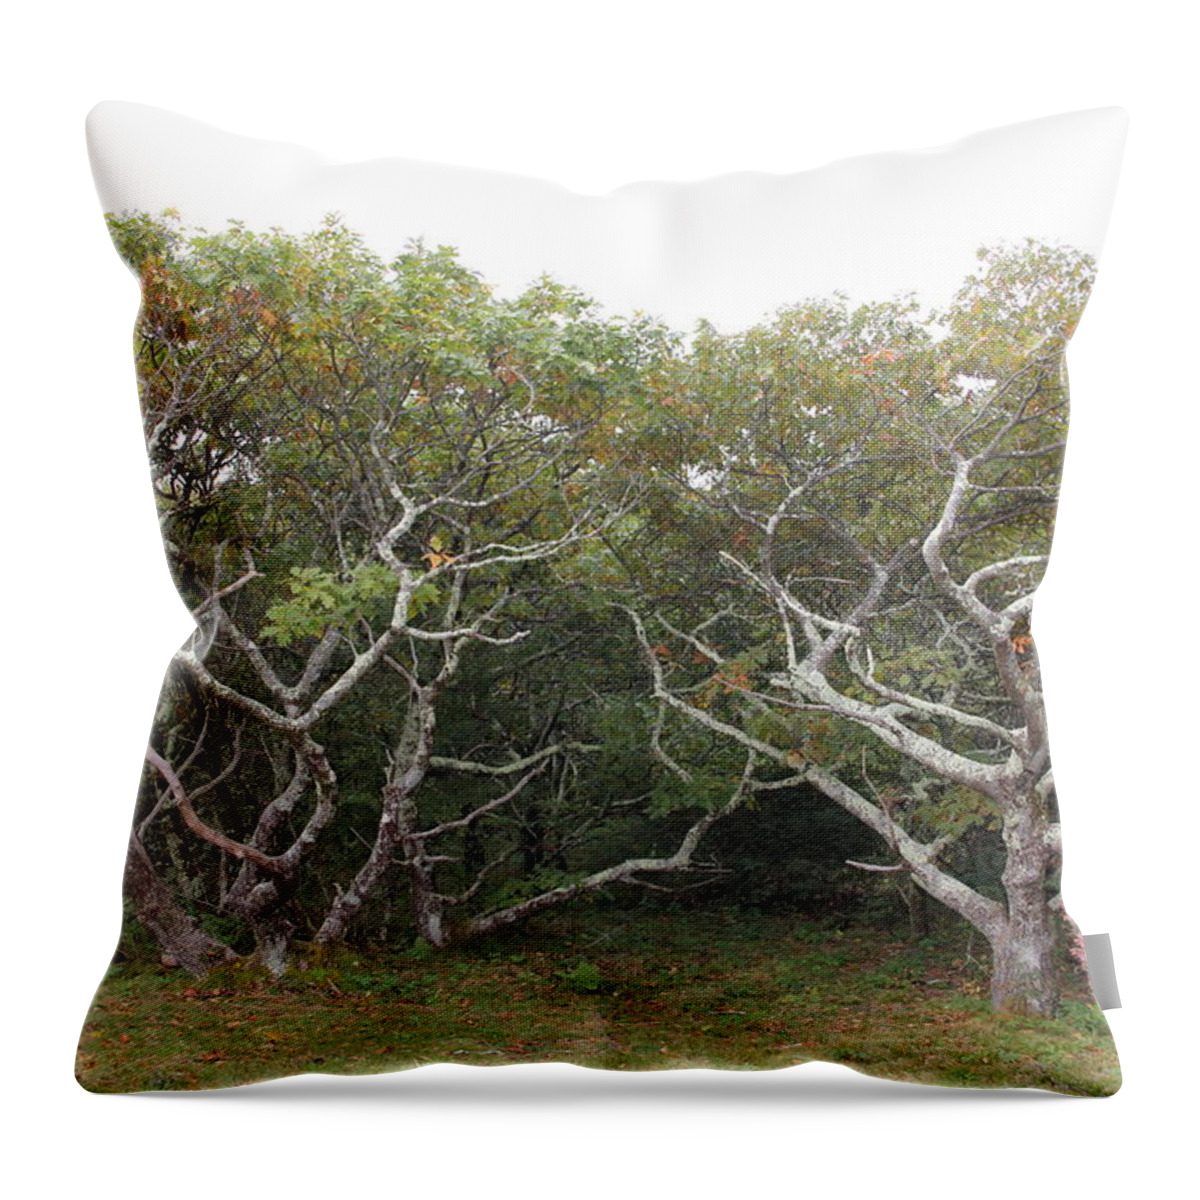 Mountains Throw Pillow featuring the photograph Forest Entry by Allen Nice-Webb